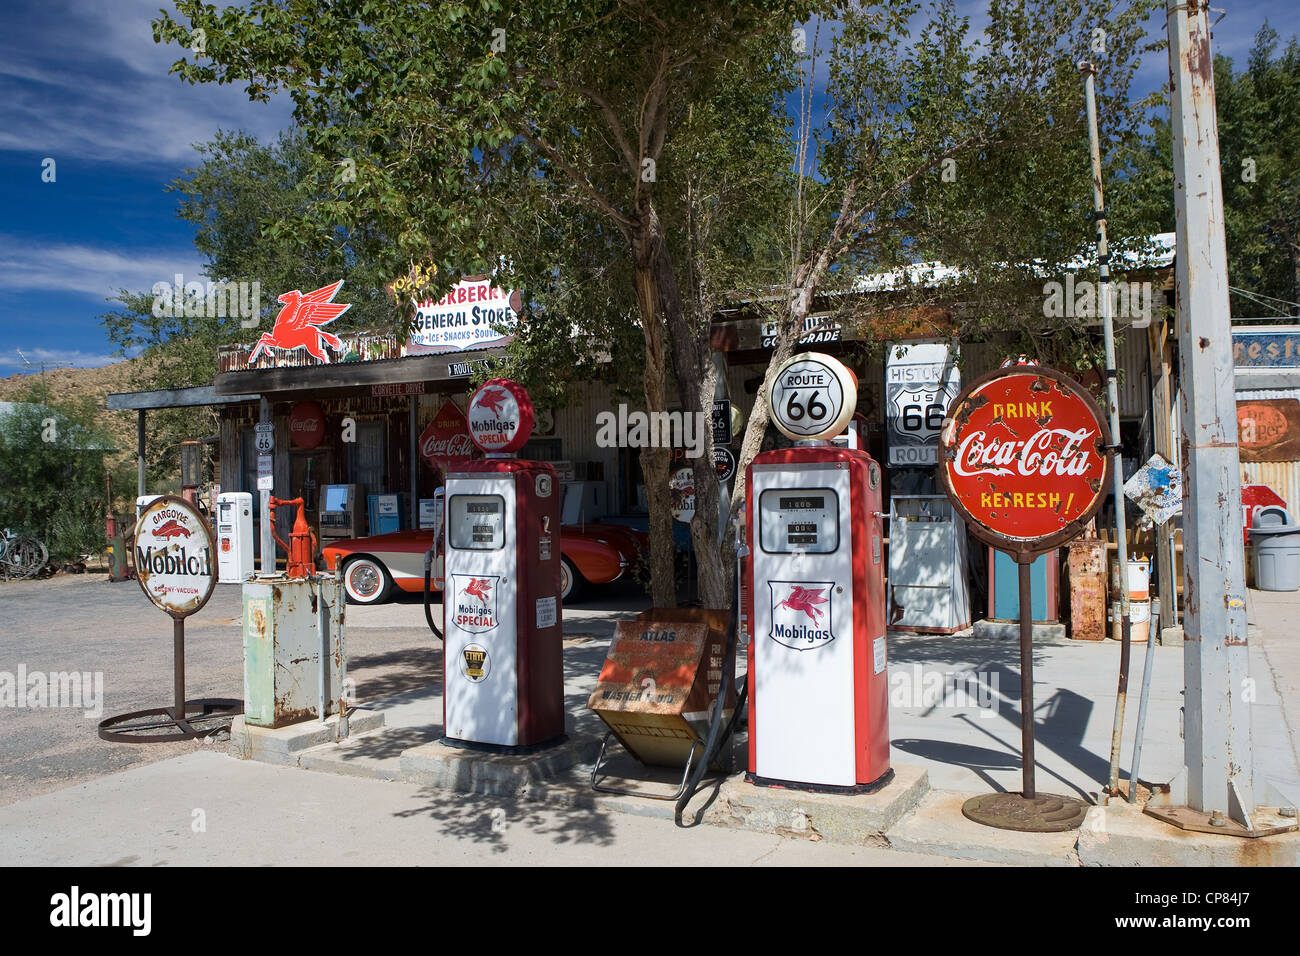 The general store at Hackberry, on Historic Route 66, Arizona, United States Stock Photo